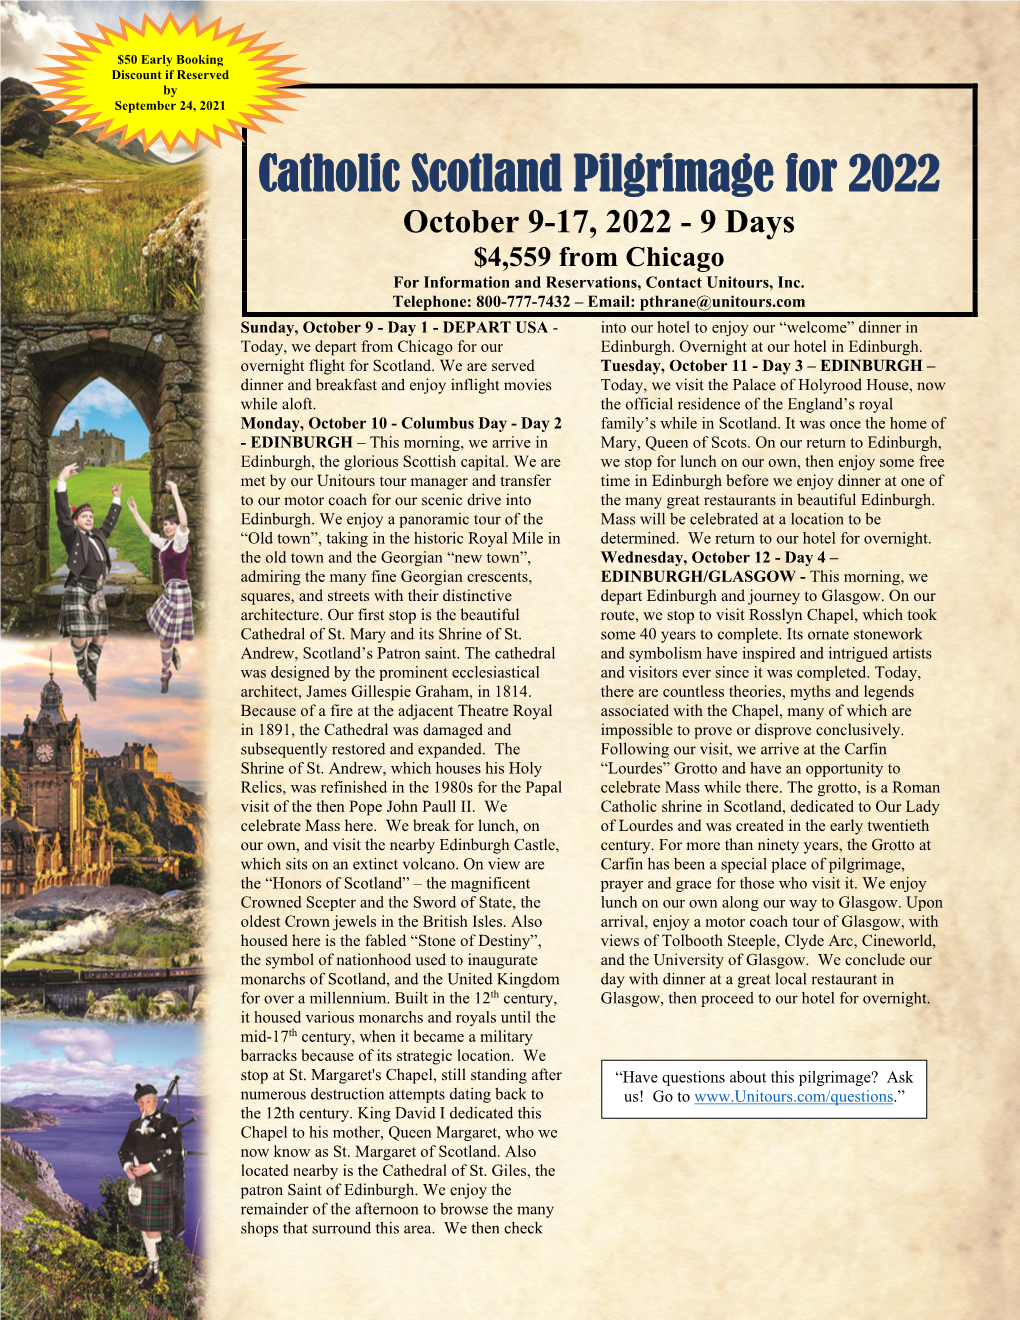 Catholic Scotland Pilgrimage for 2022 October 9-17, 2022 - 9 Days $4,559 from Chicago for Information and Reservations, Contact Unitours, Inc